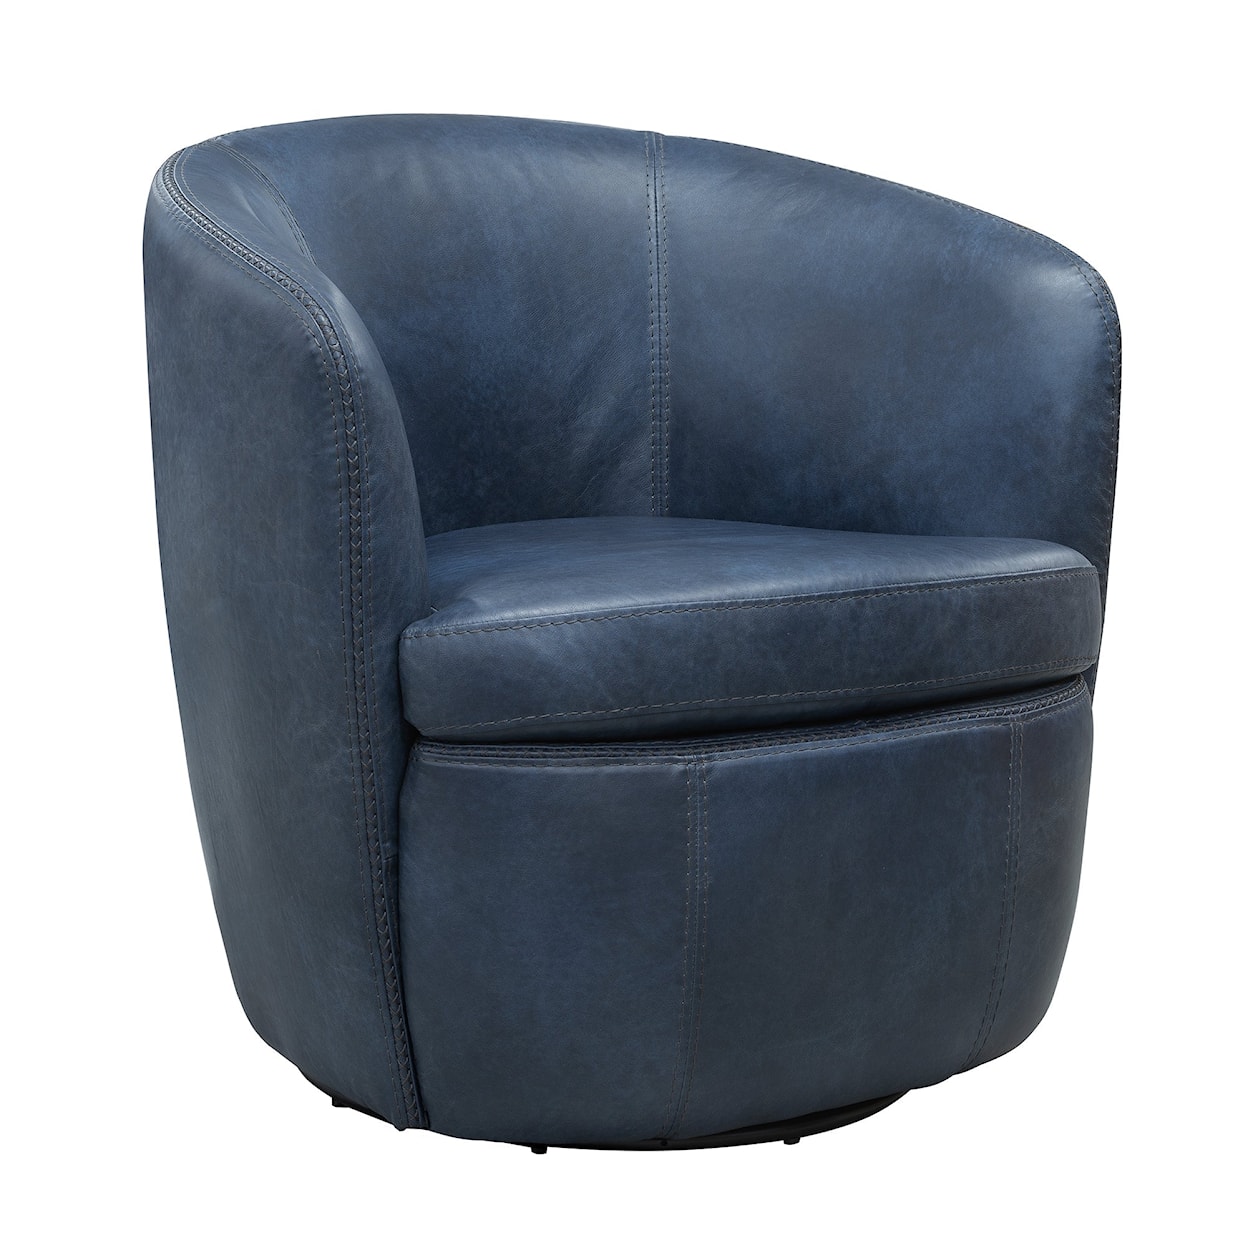 Forest Hills Benjamin Leather Swivel Chair